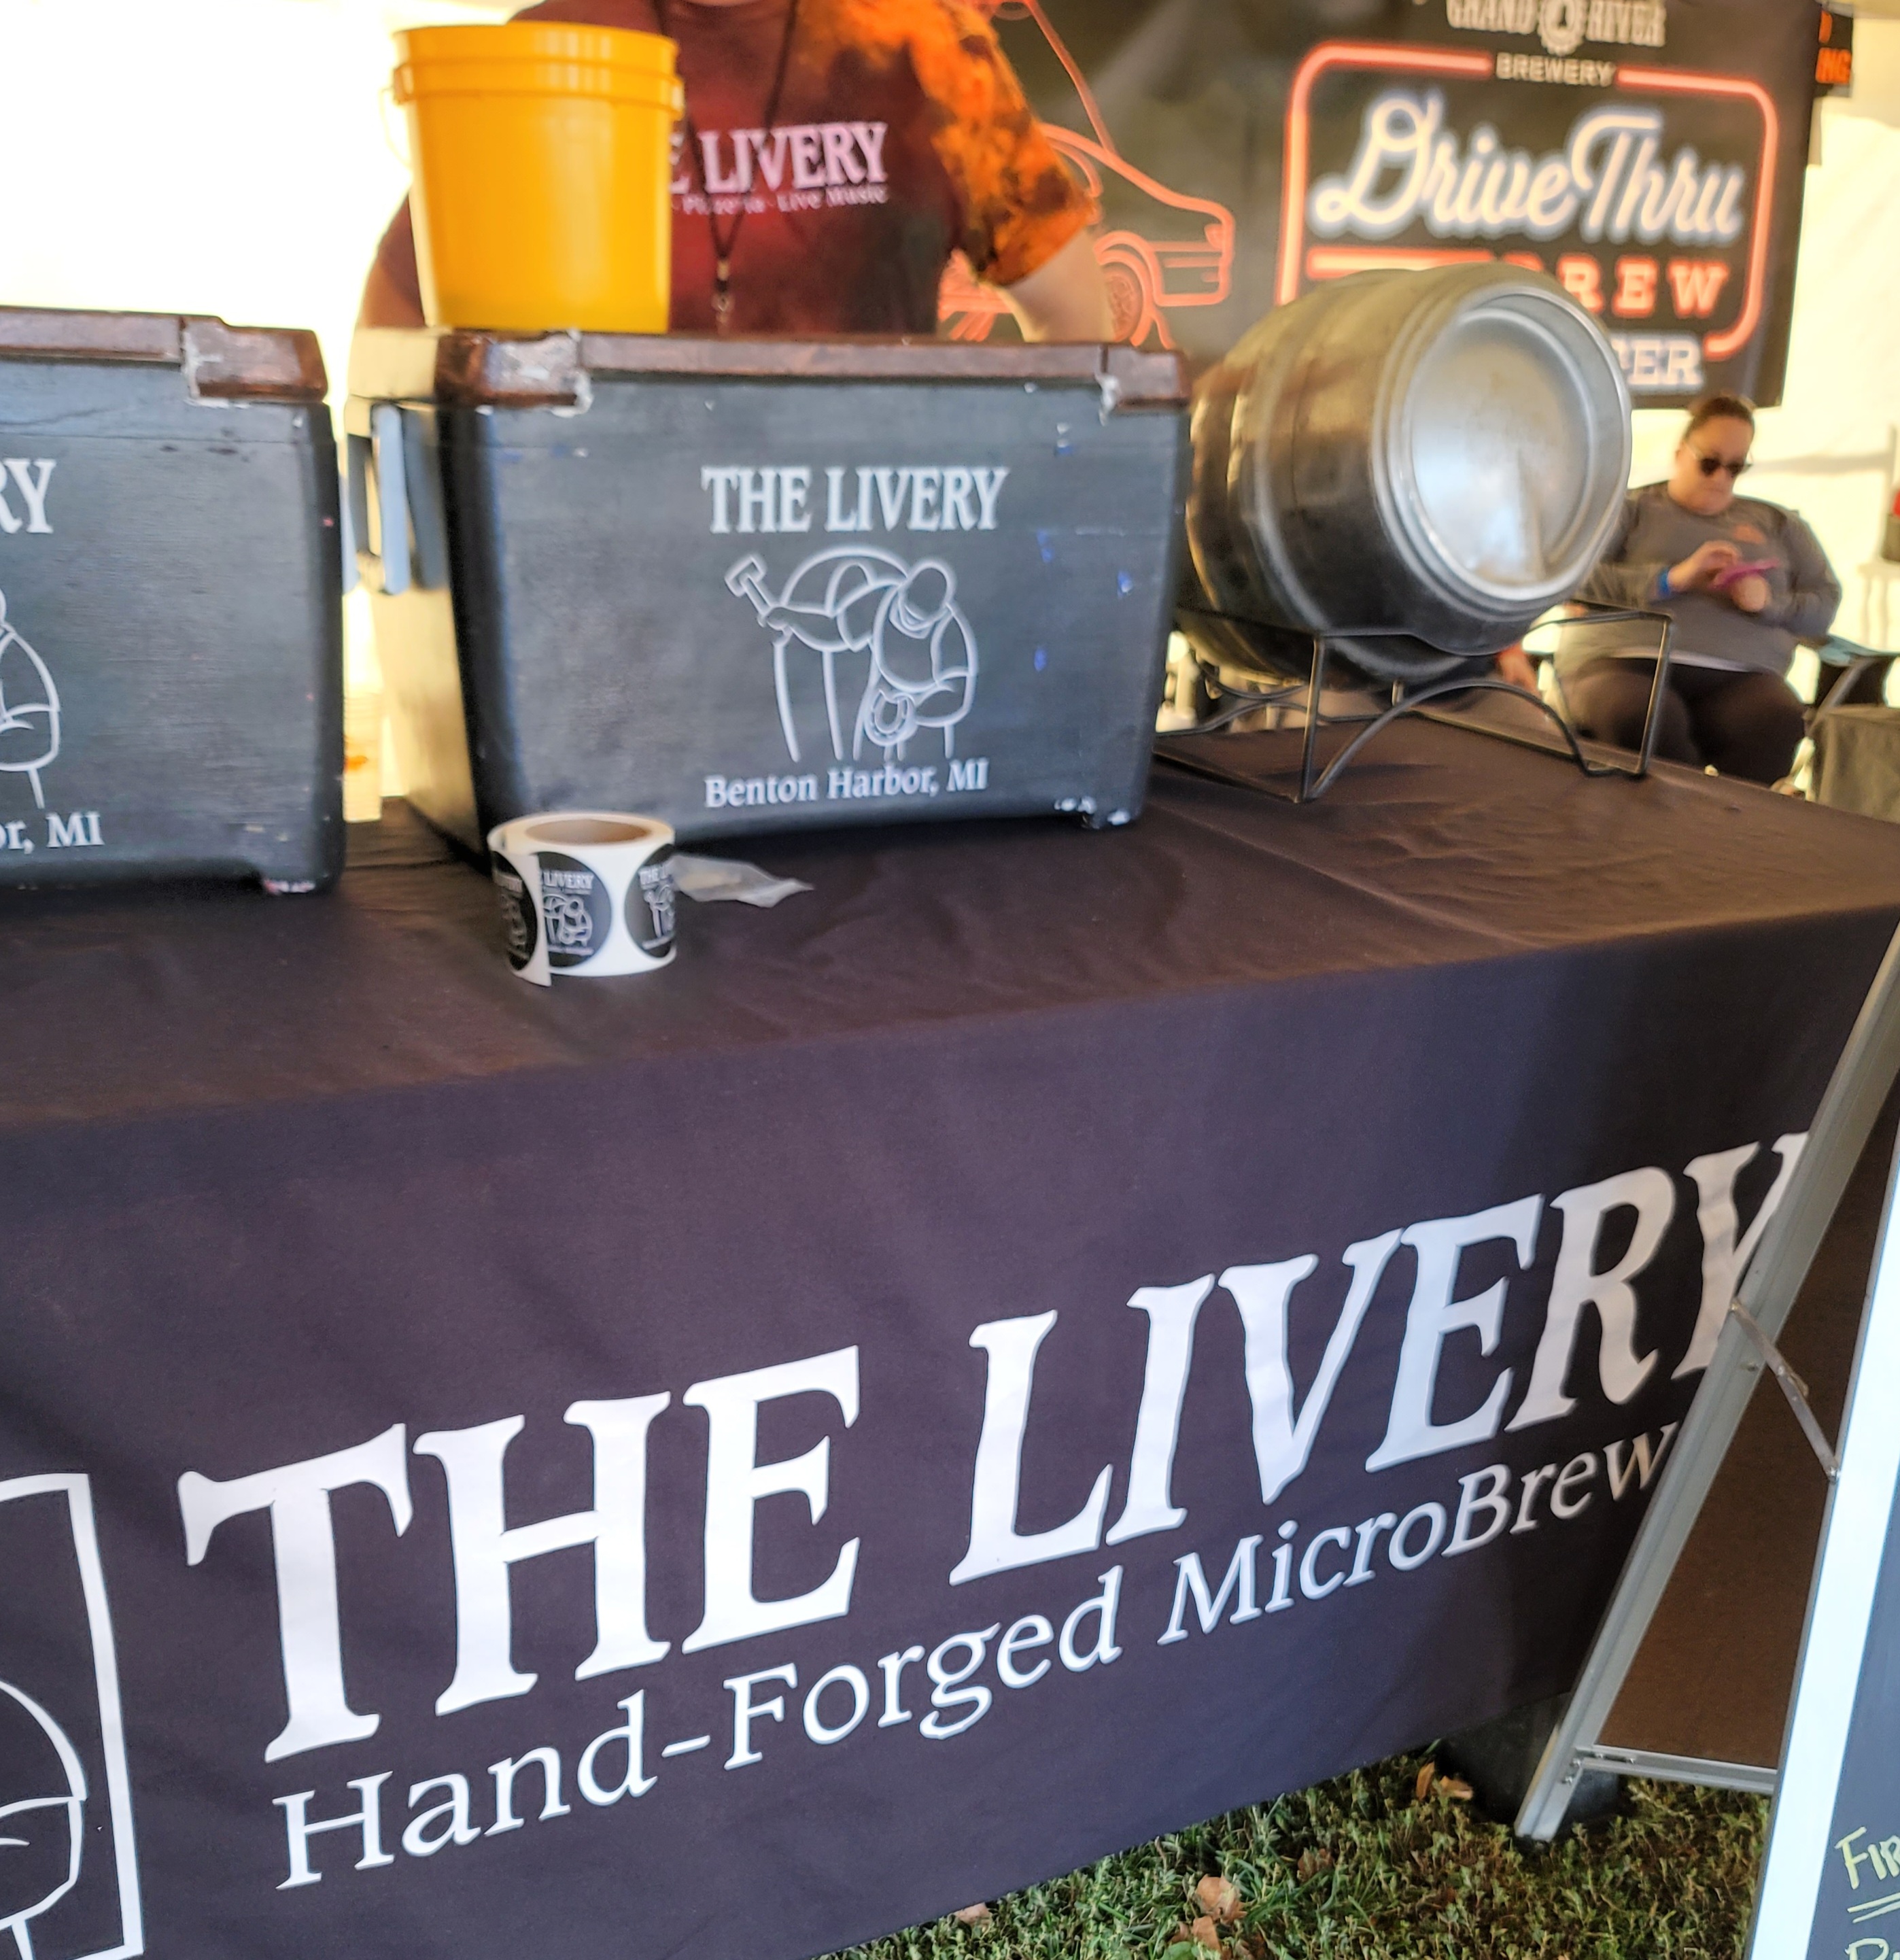 The Livery Microbrewery